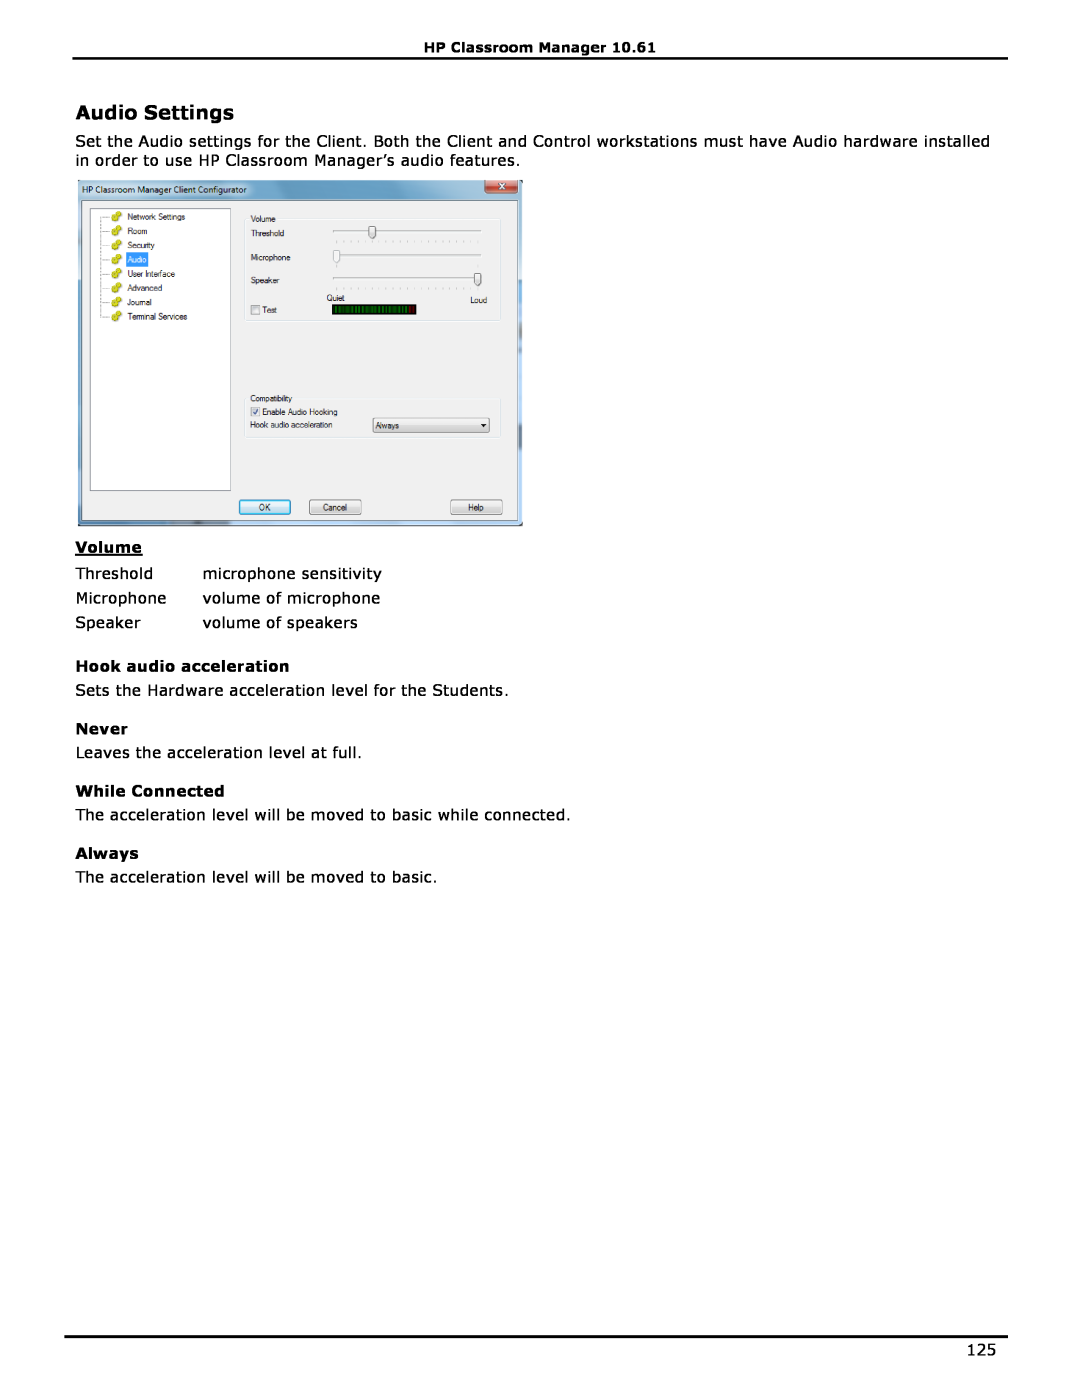 HP Classroom Manager manual Audio Settings, Volume, Hook audio acceleration, Never, While Connected, Always 